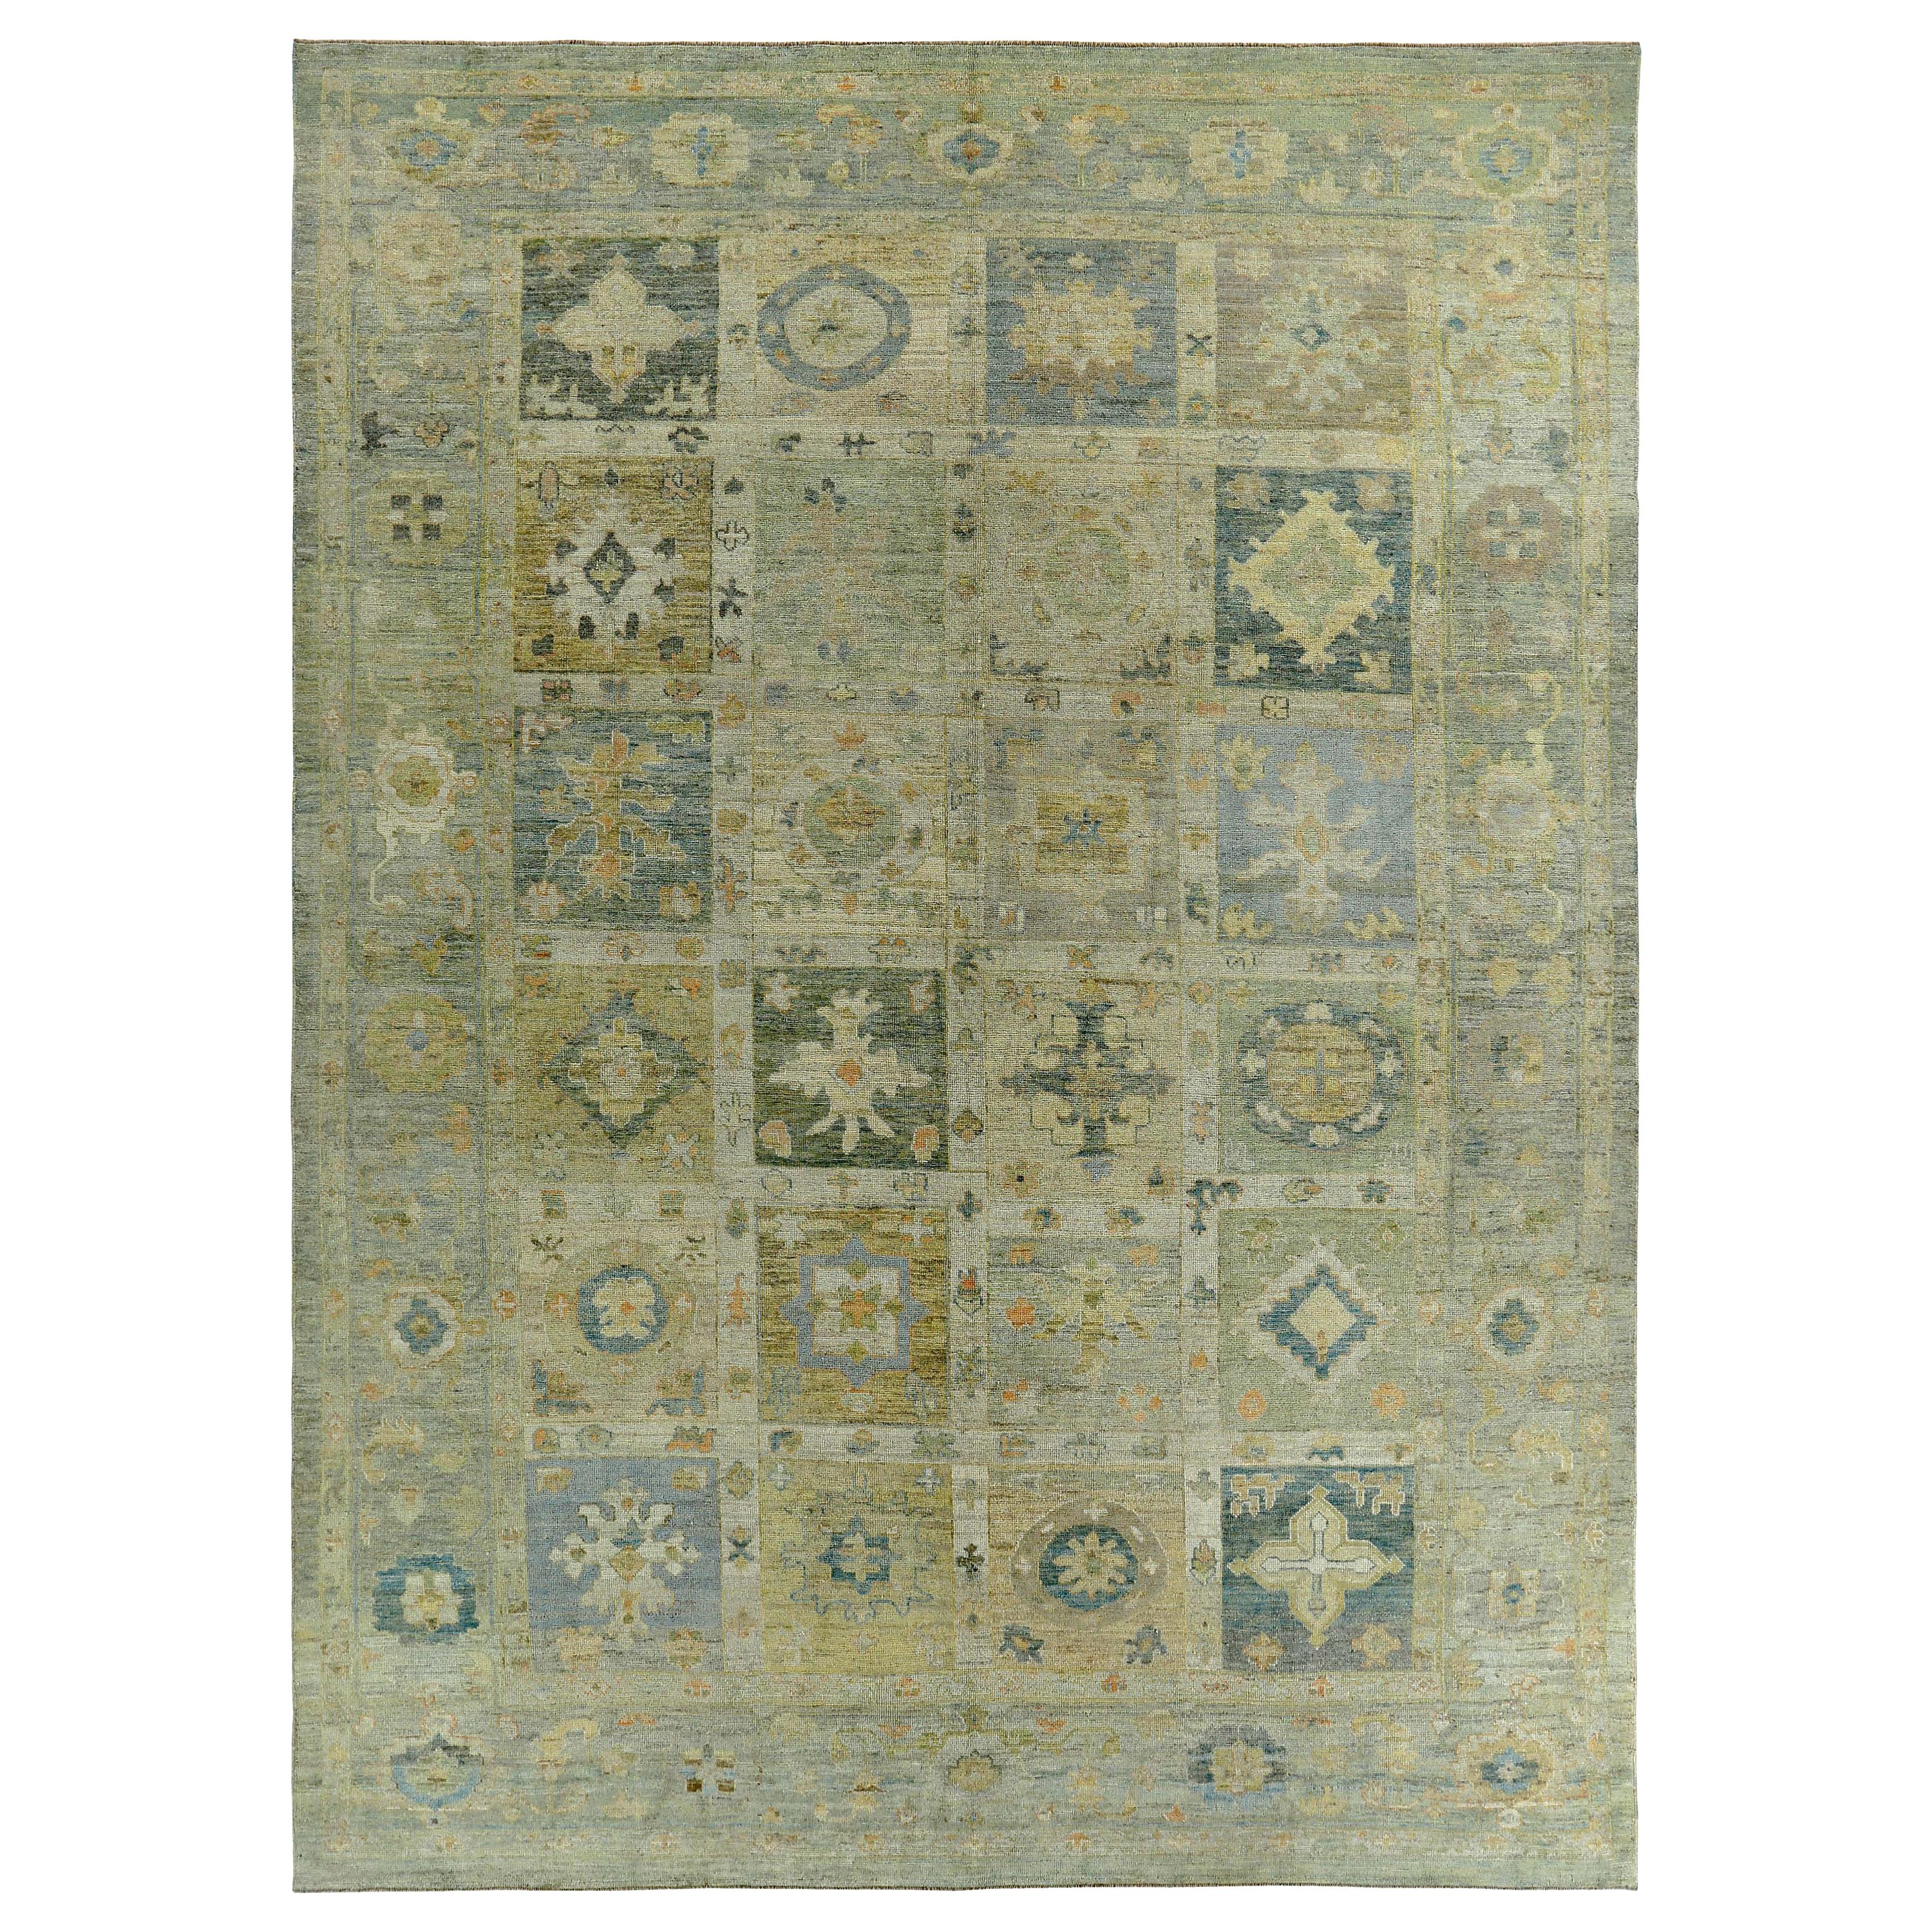 New Turkish Oushak Rug with Blue and Yellow Floral Design on a Green Field